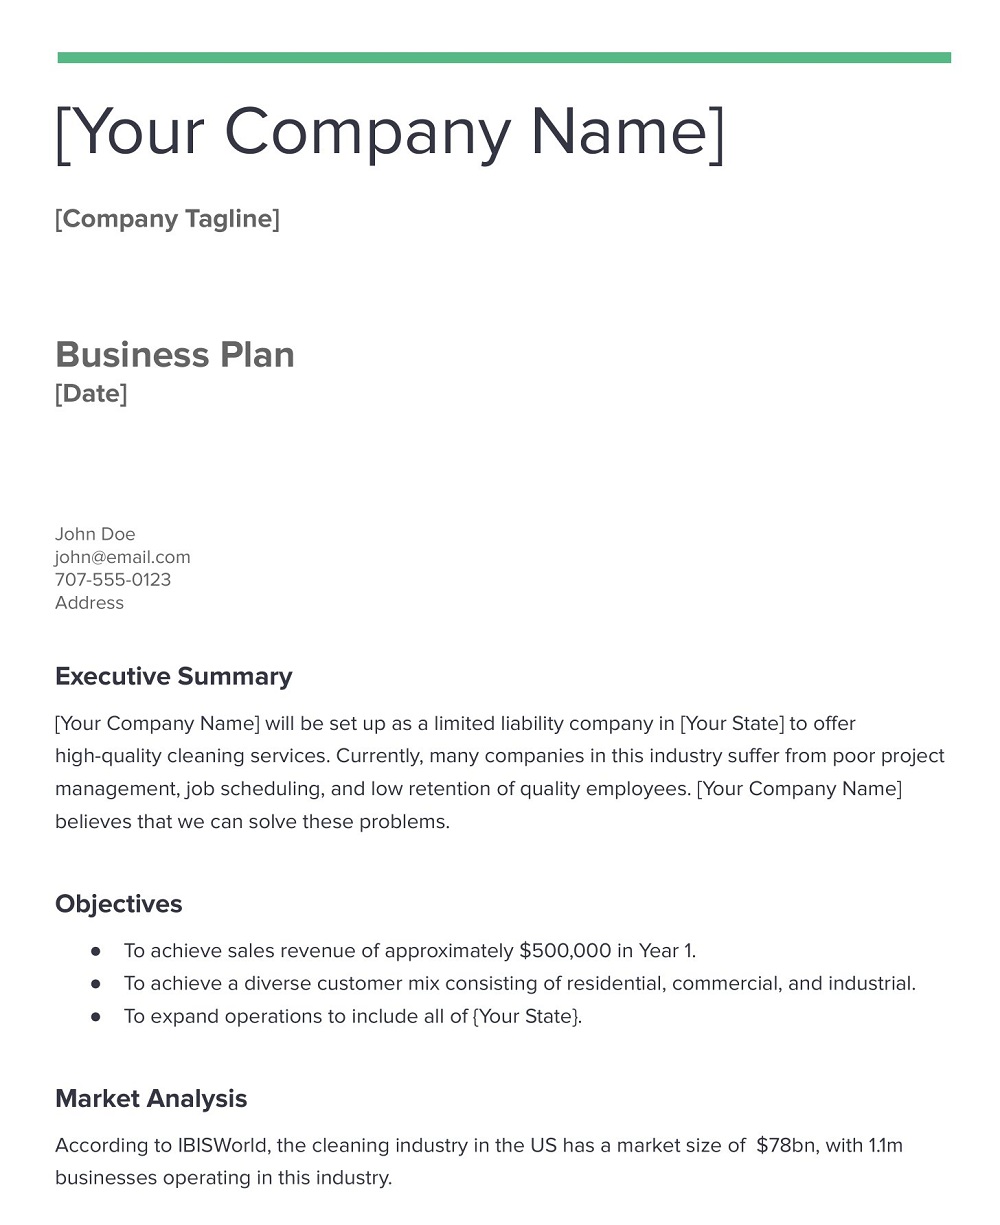 Cleaning Services Business Budget Plan PDF